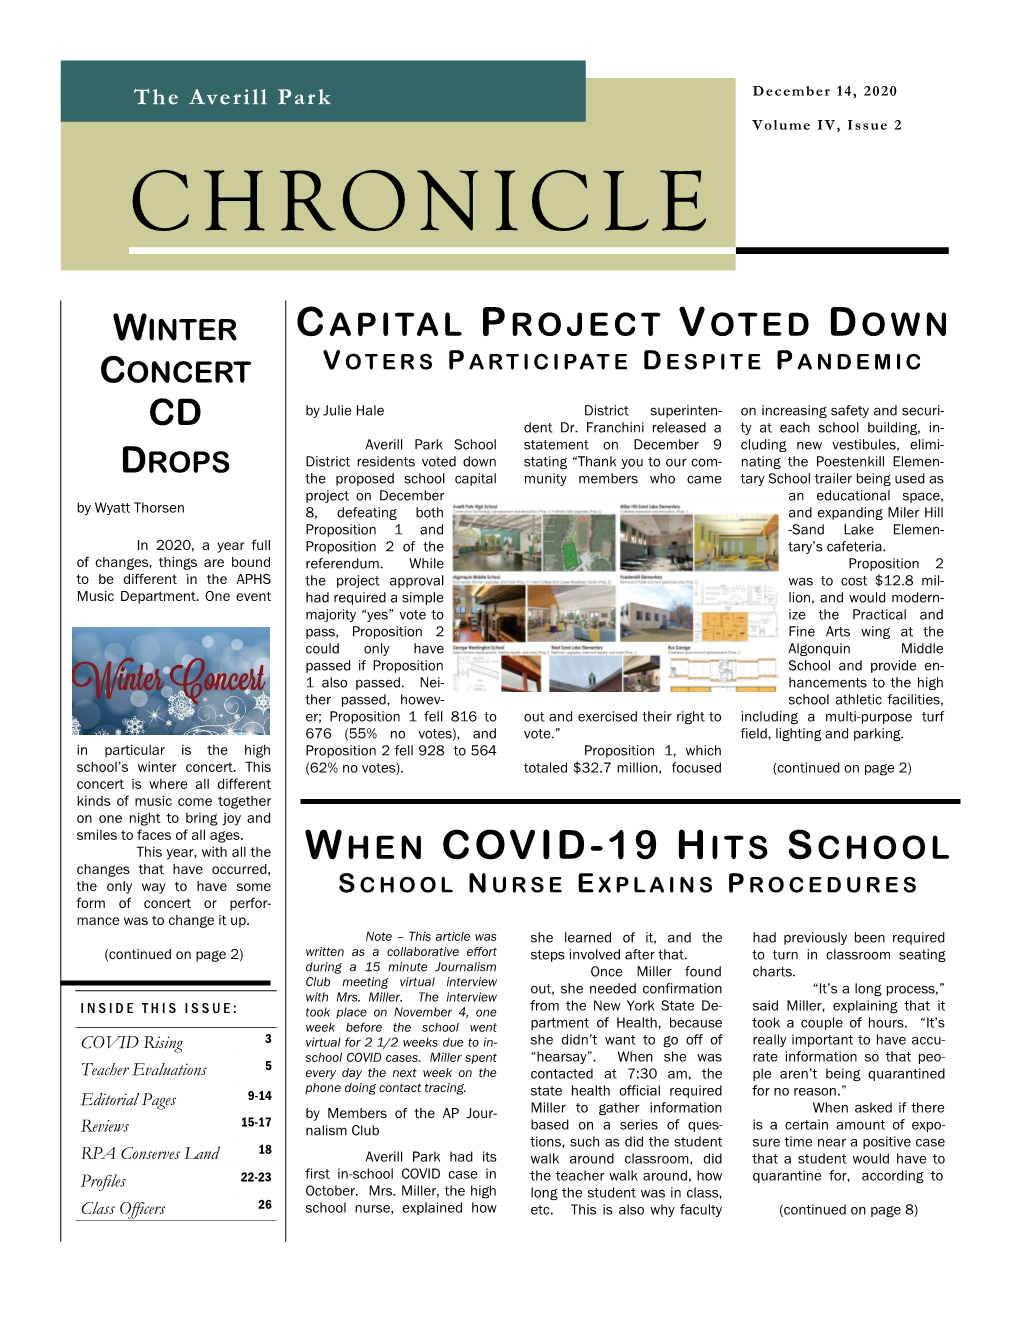 The Chronicle, December 2020